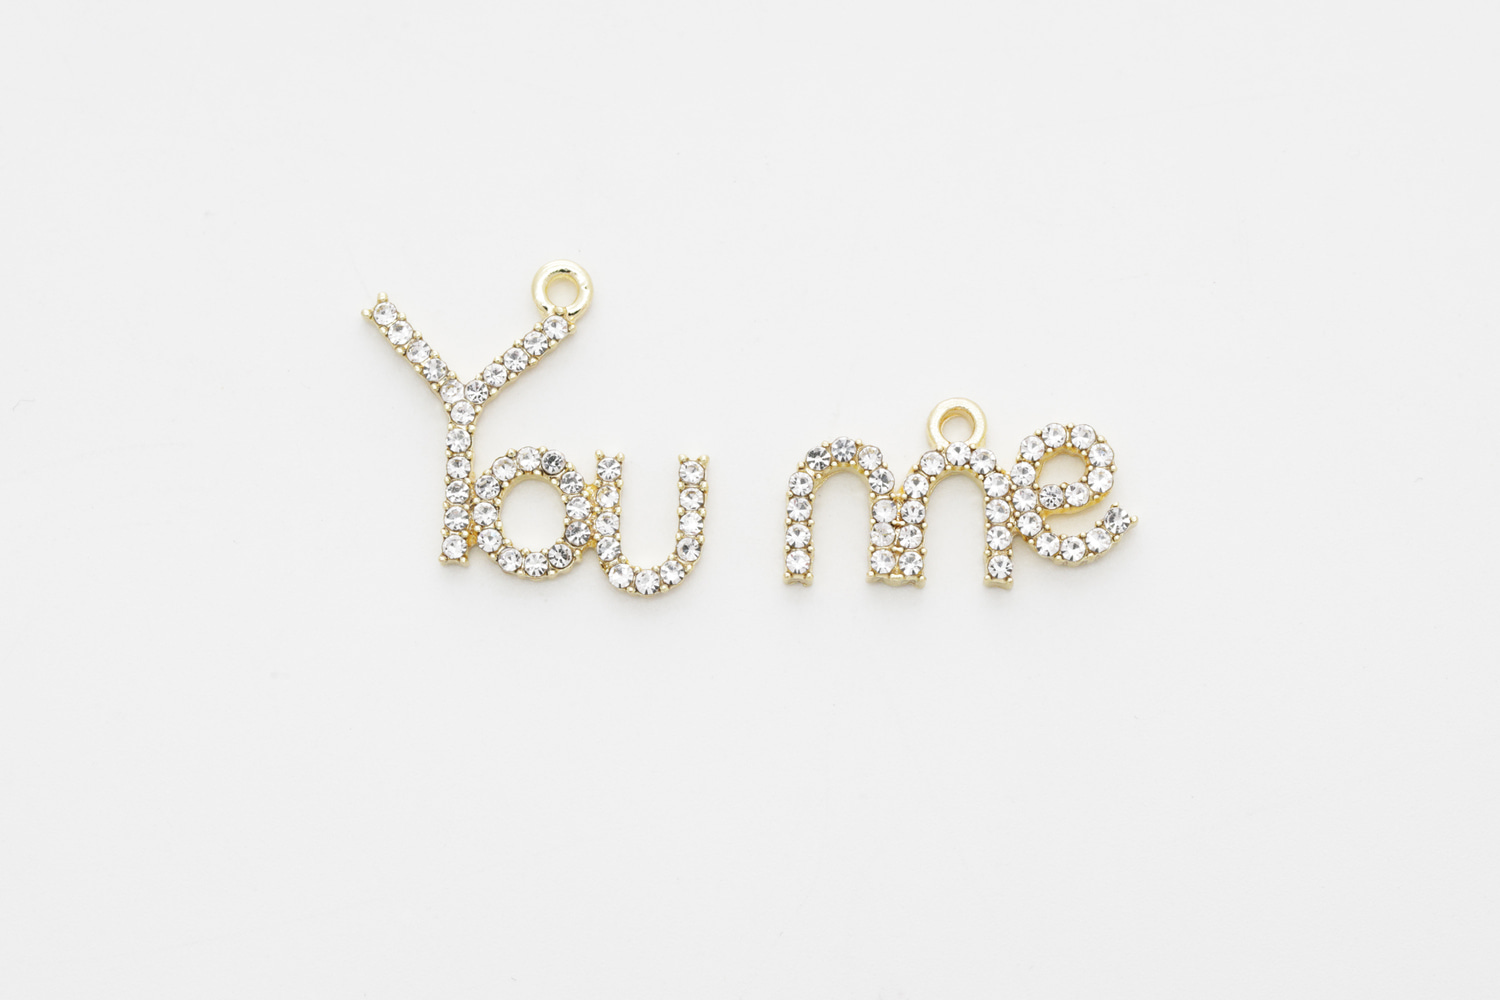 [T31-VC1] You and me pendant, Tin alloy, Cubic zirconia, Dainty charm, Letter charm, Jewelry making supplies, 2 pcs